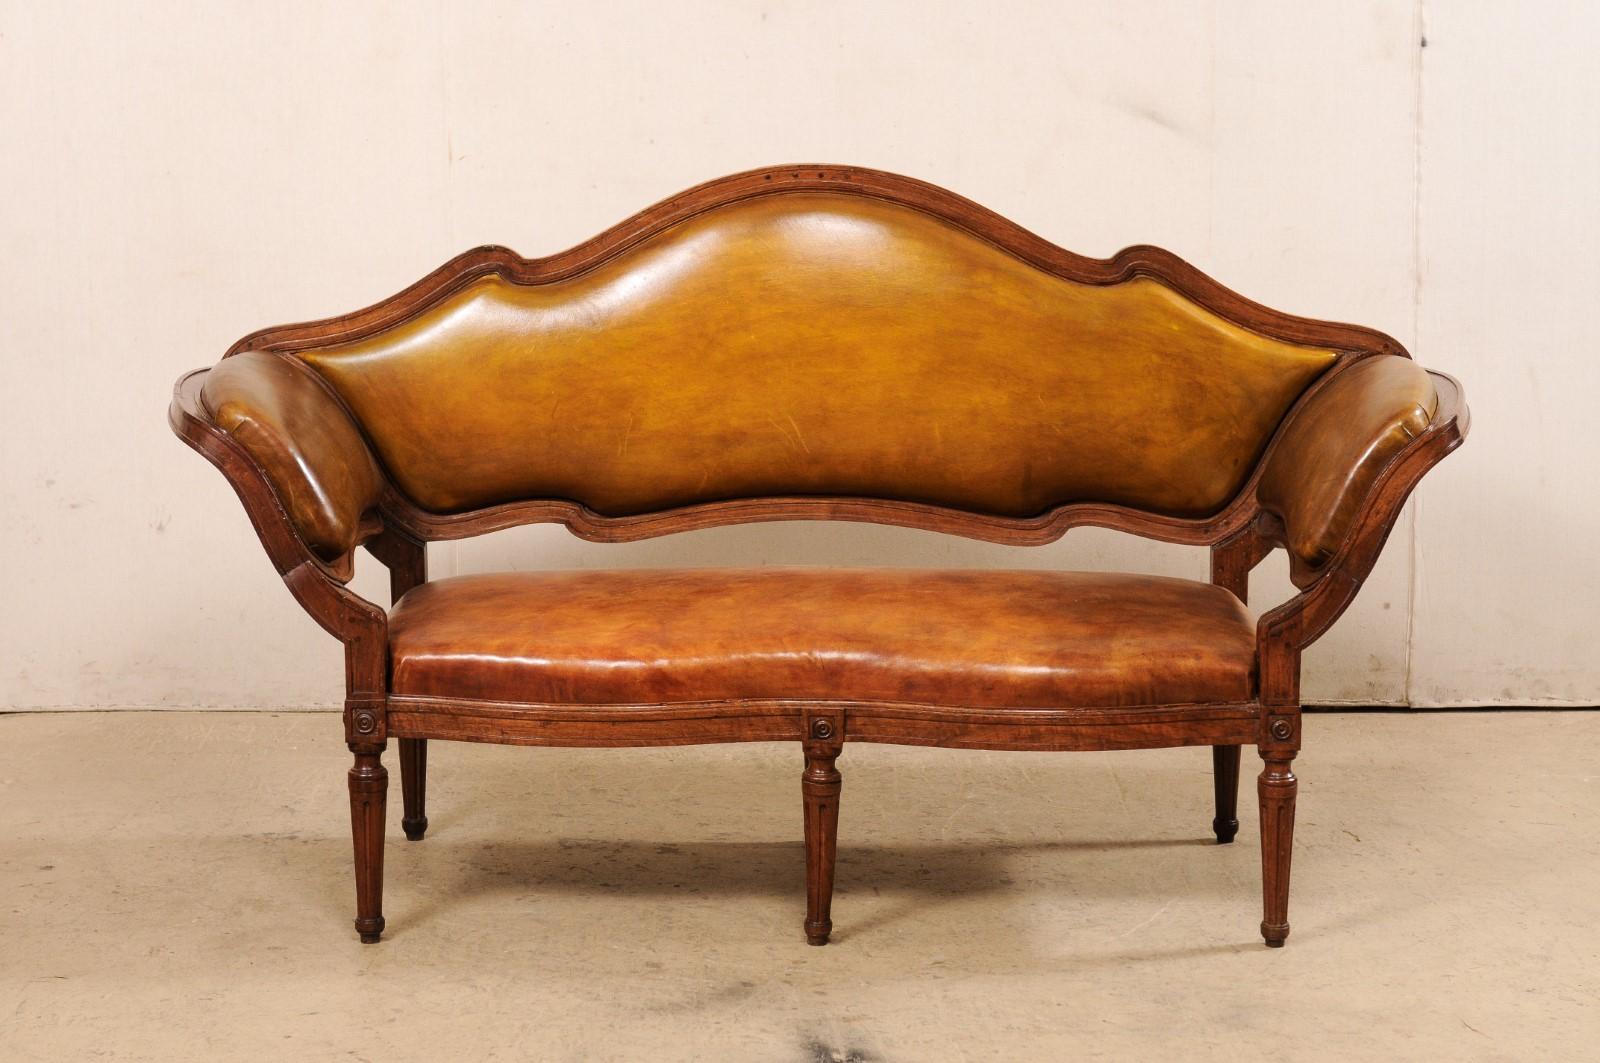 An Italian Venetian leather upholstered sofa from the 19th century. This antique settee from Italy features a elegantly dramatic arched top rail at backside that descends into padded, out-swept arms. The walnut frame surrounds the leather